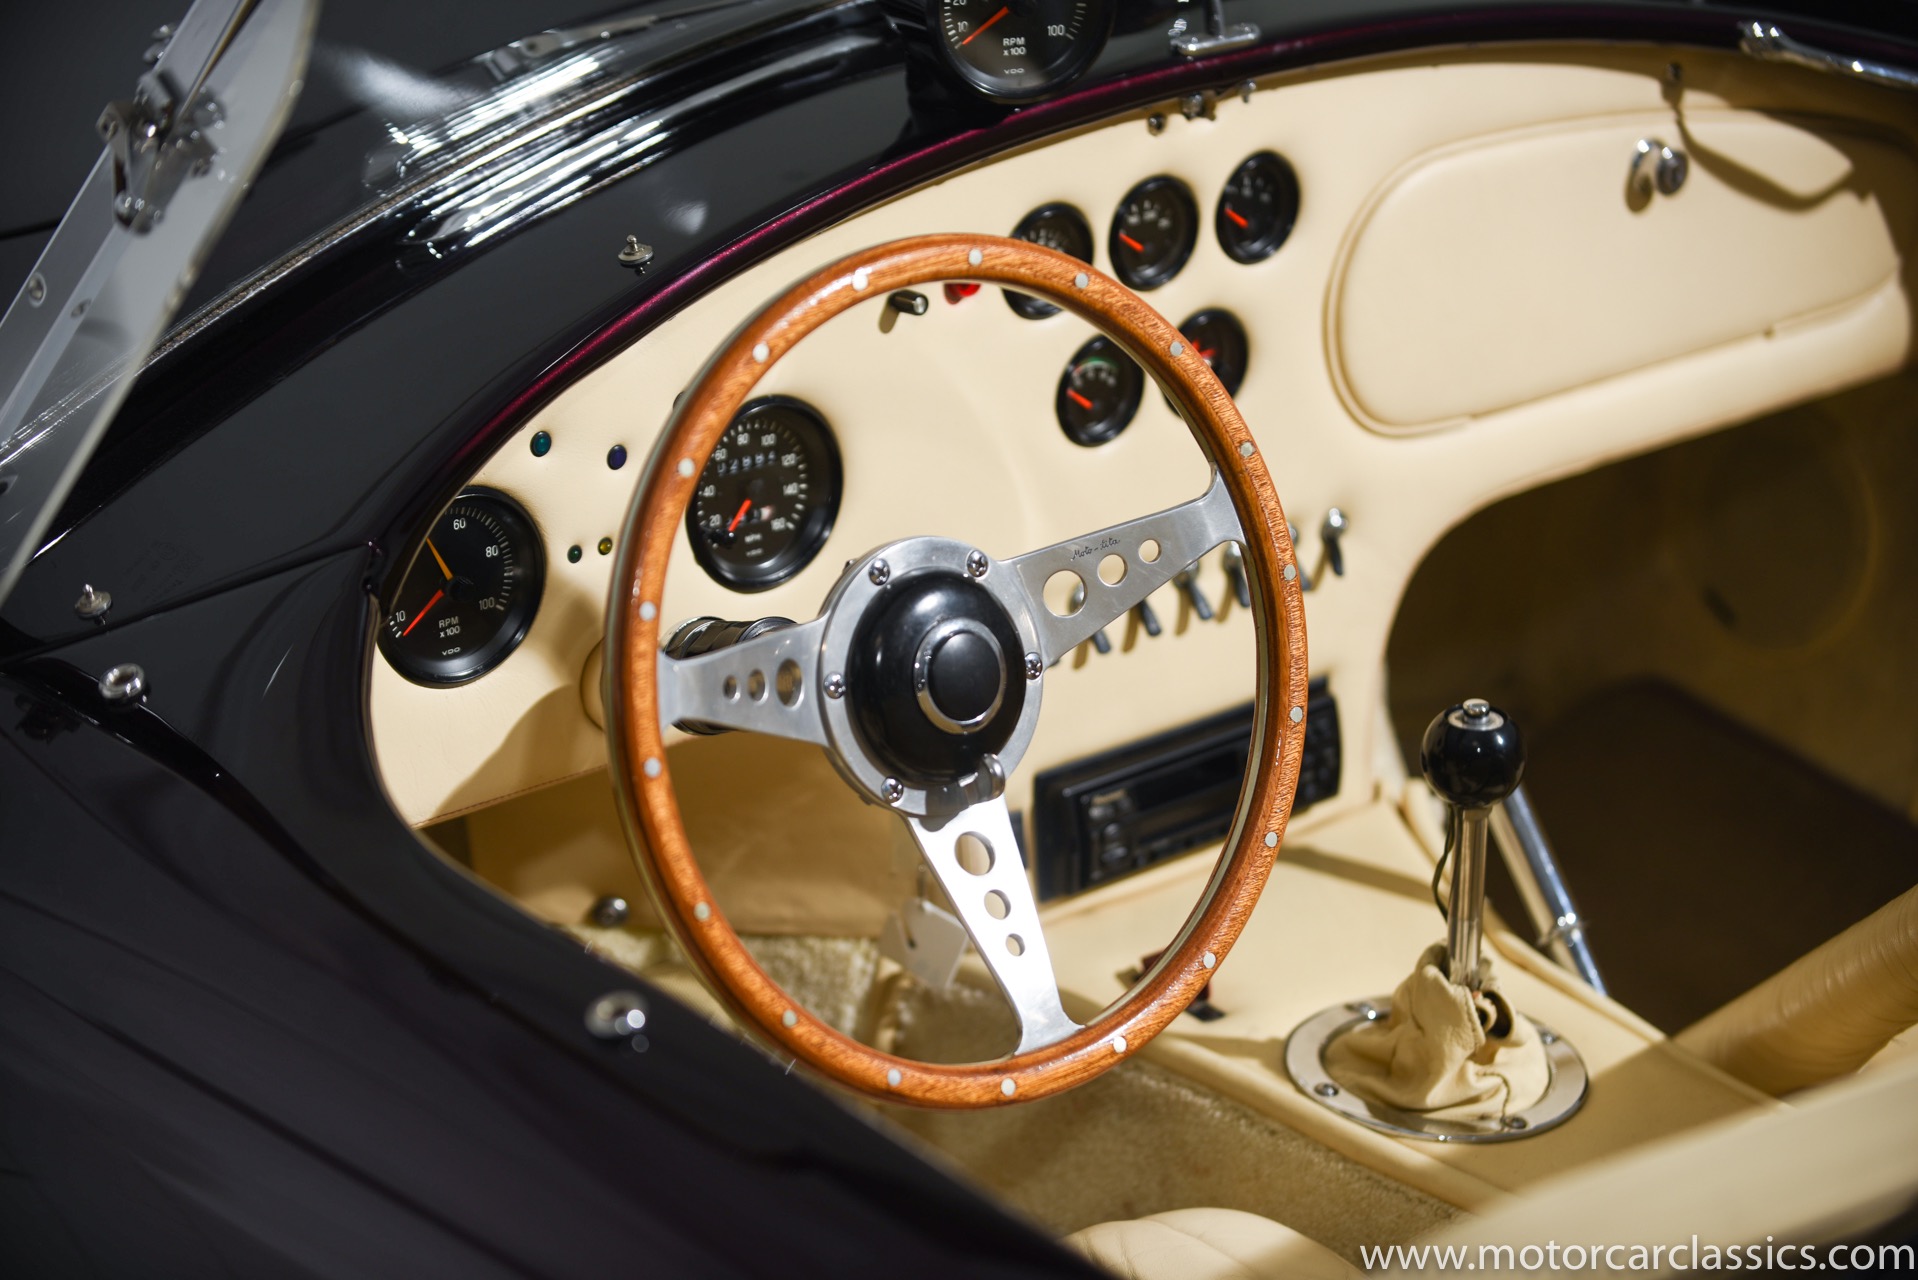 Used 1963 Shelby Cobra For Sale ($675,000) | Motorcar Classics Stock #1315